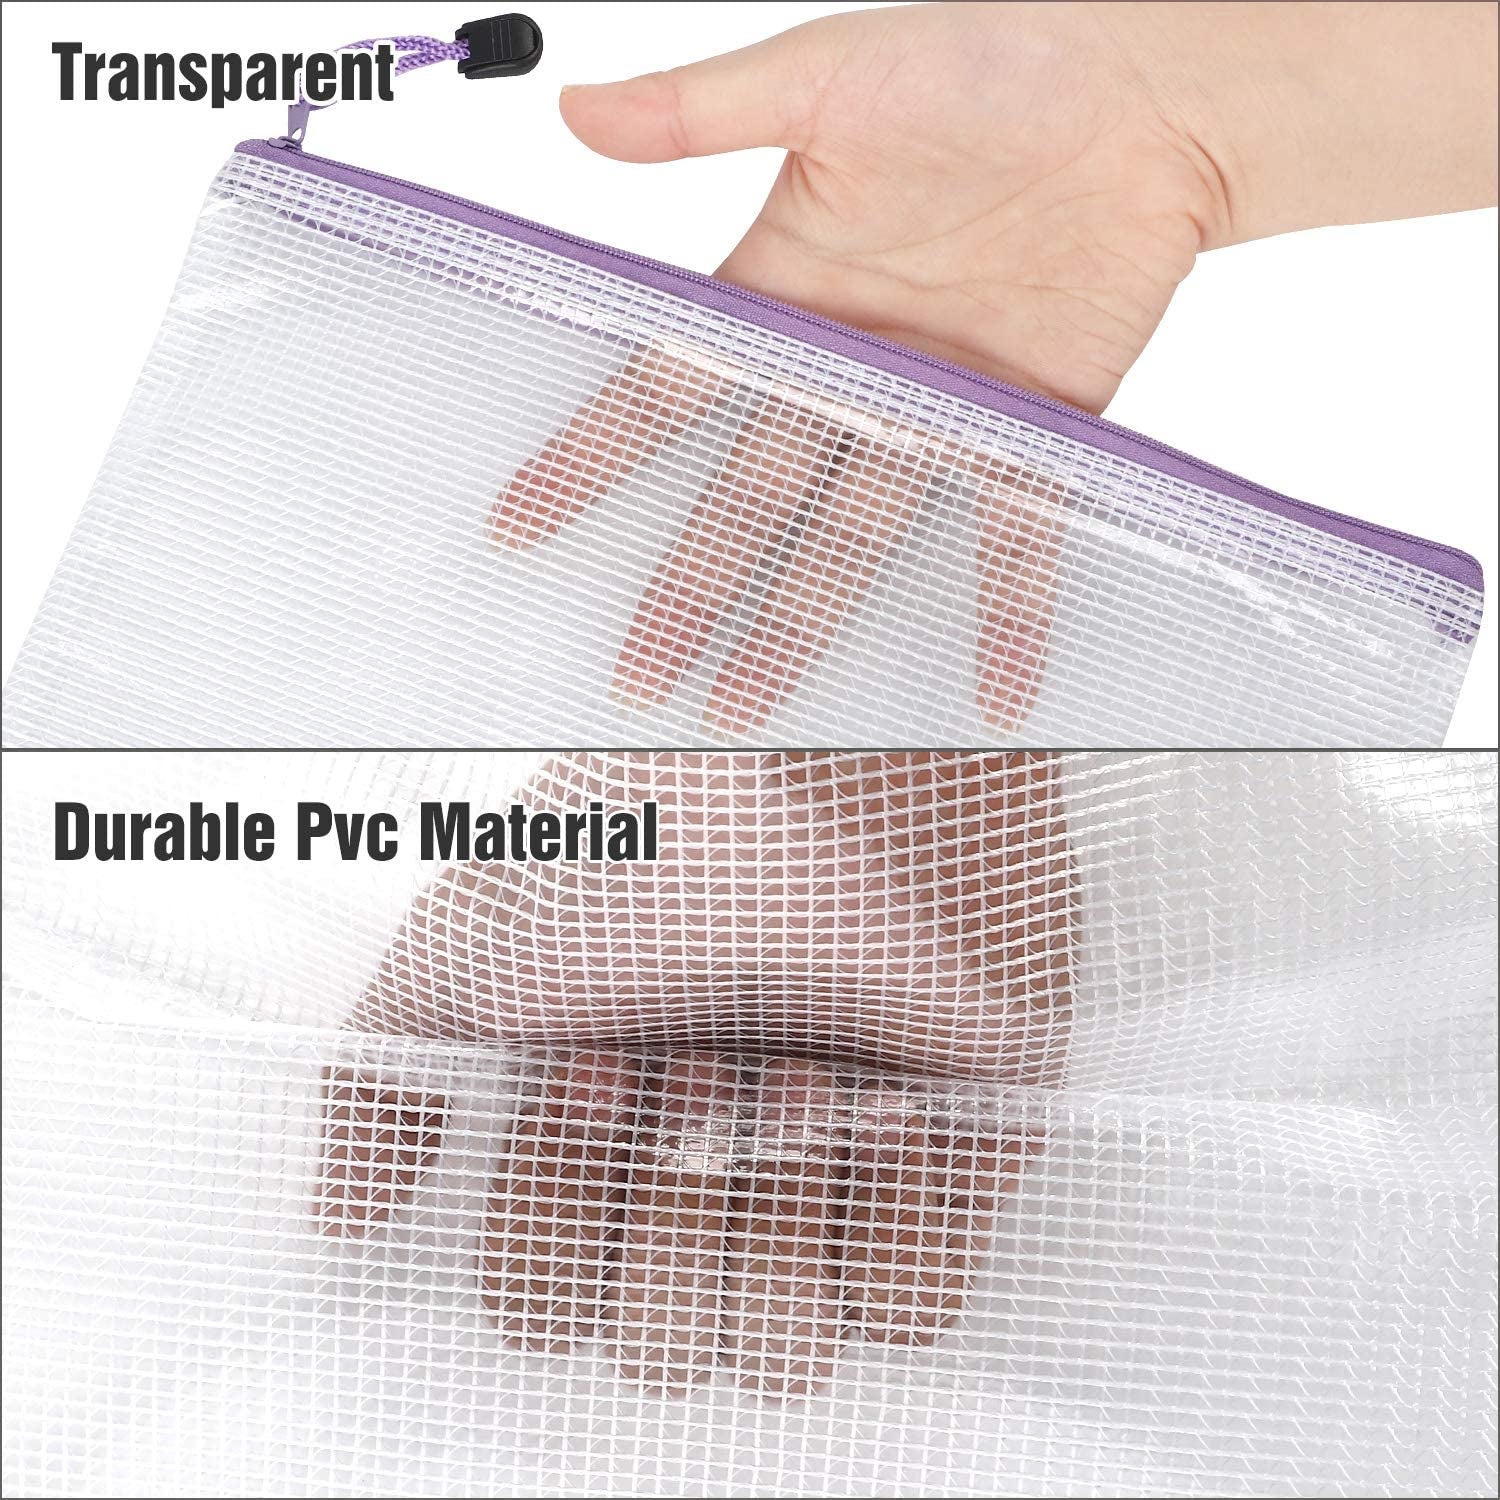 person putting hand inside of transparent travel pouch with a zipper closure